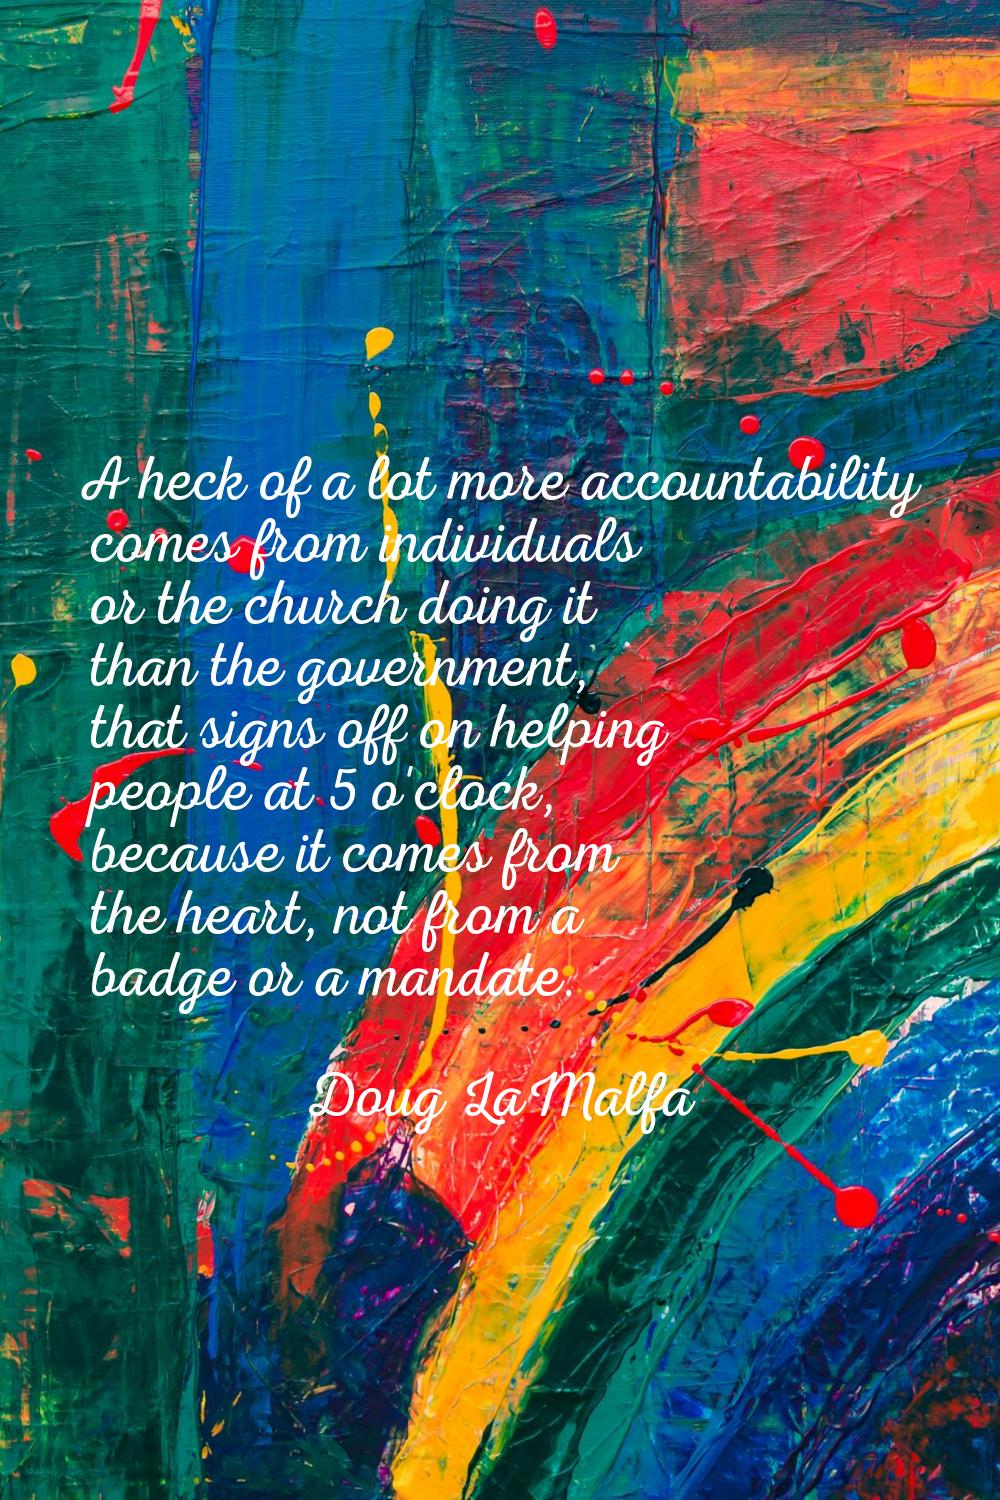 A heck of a lot more accountability comes from individuals or the church doing it than the governme